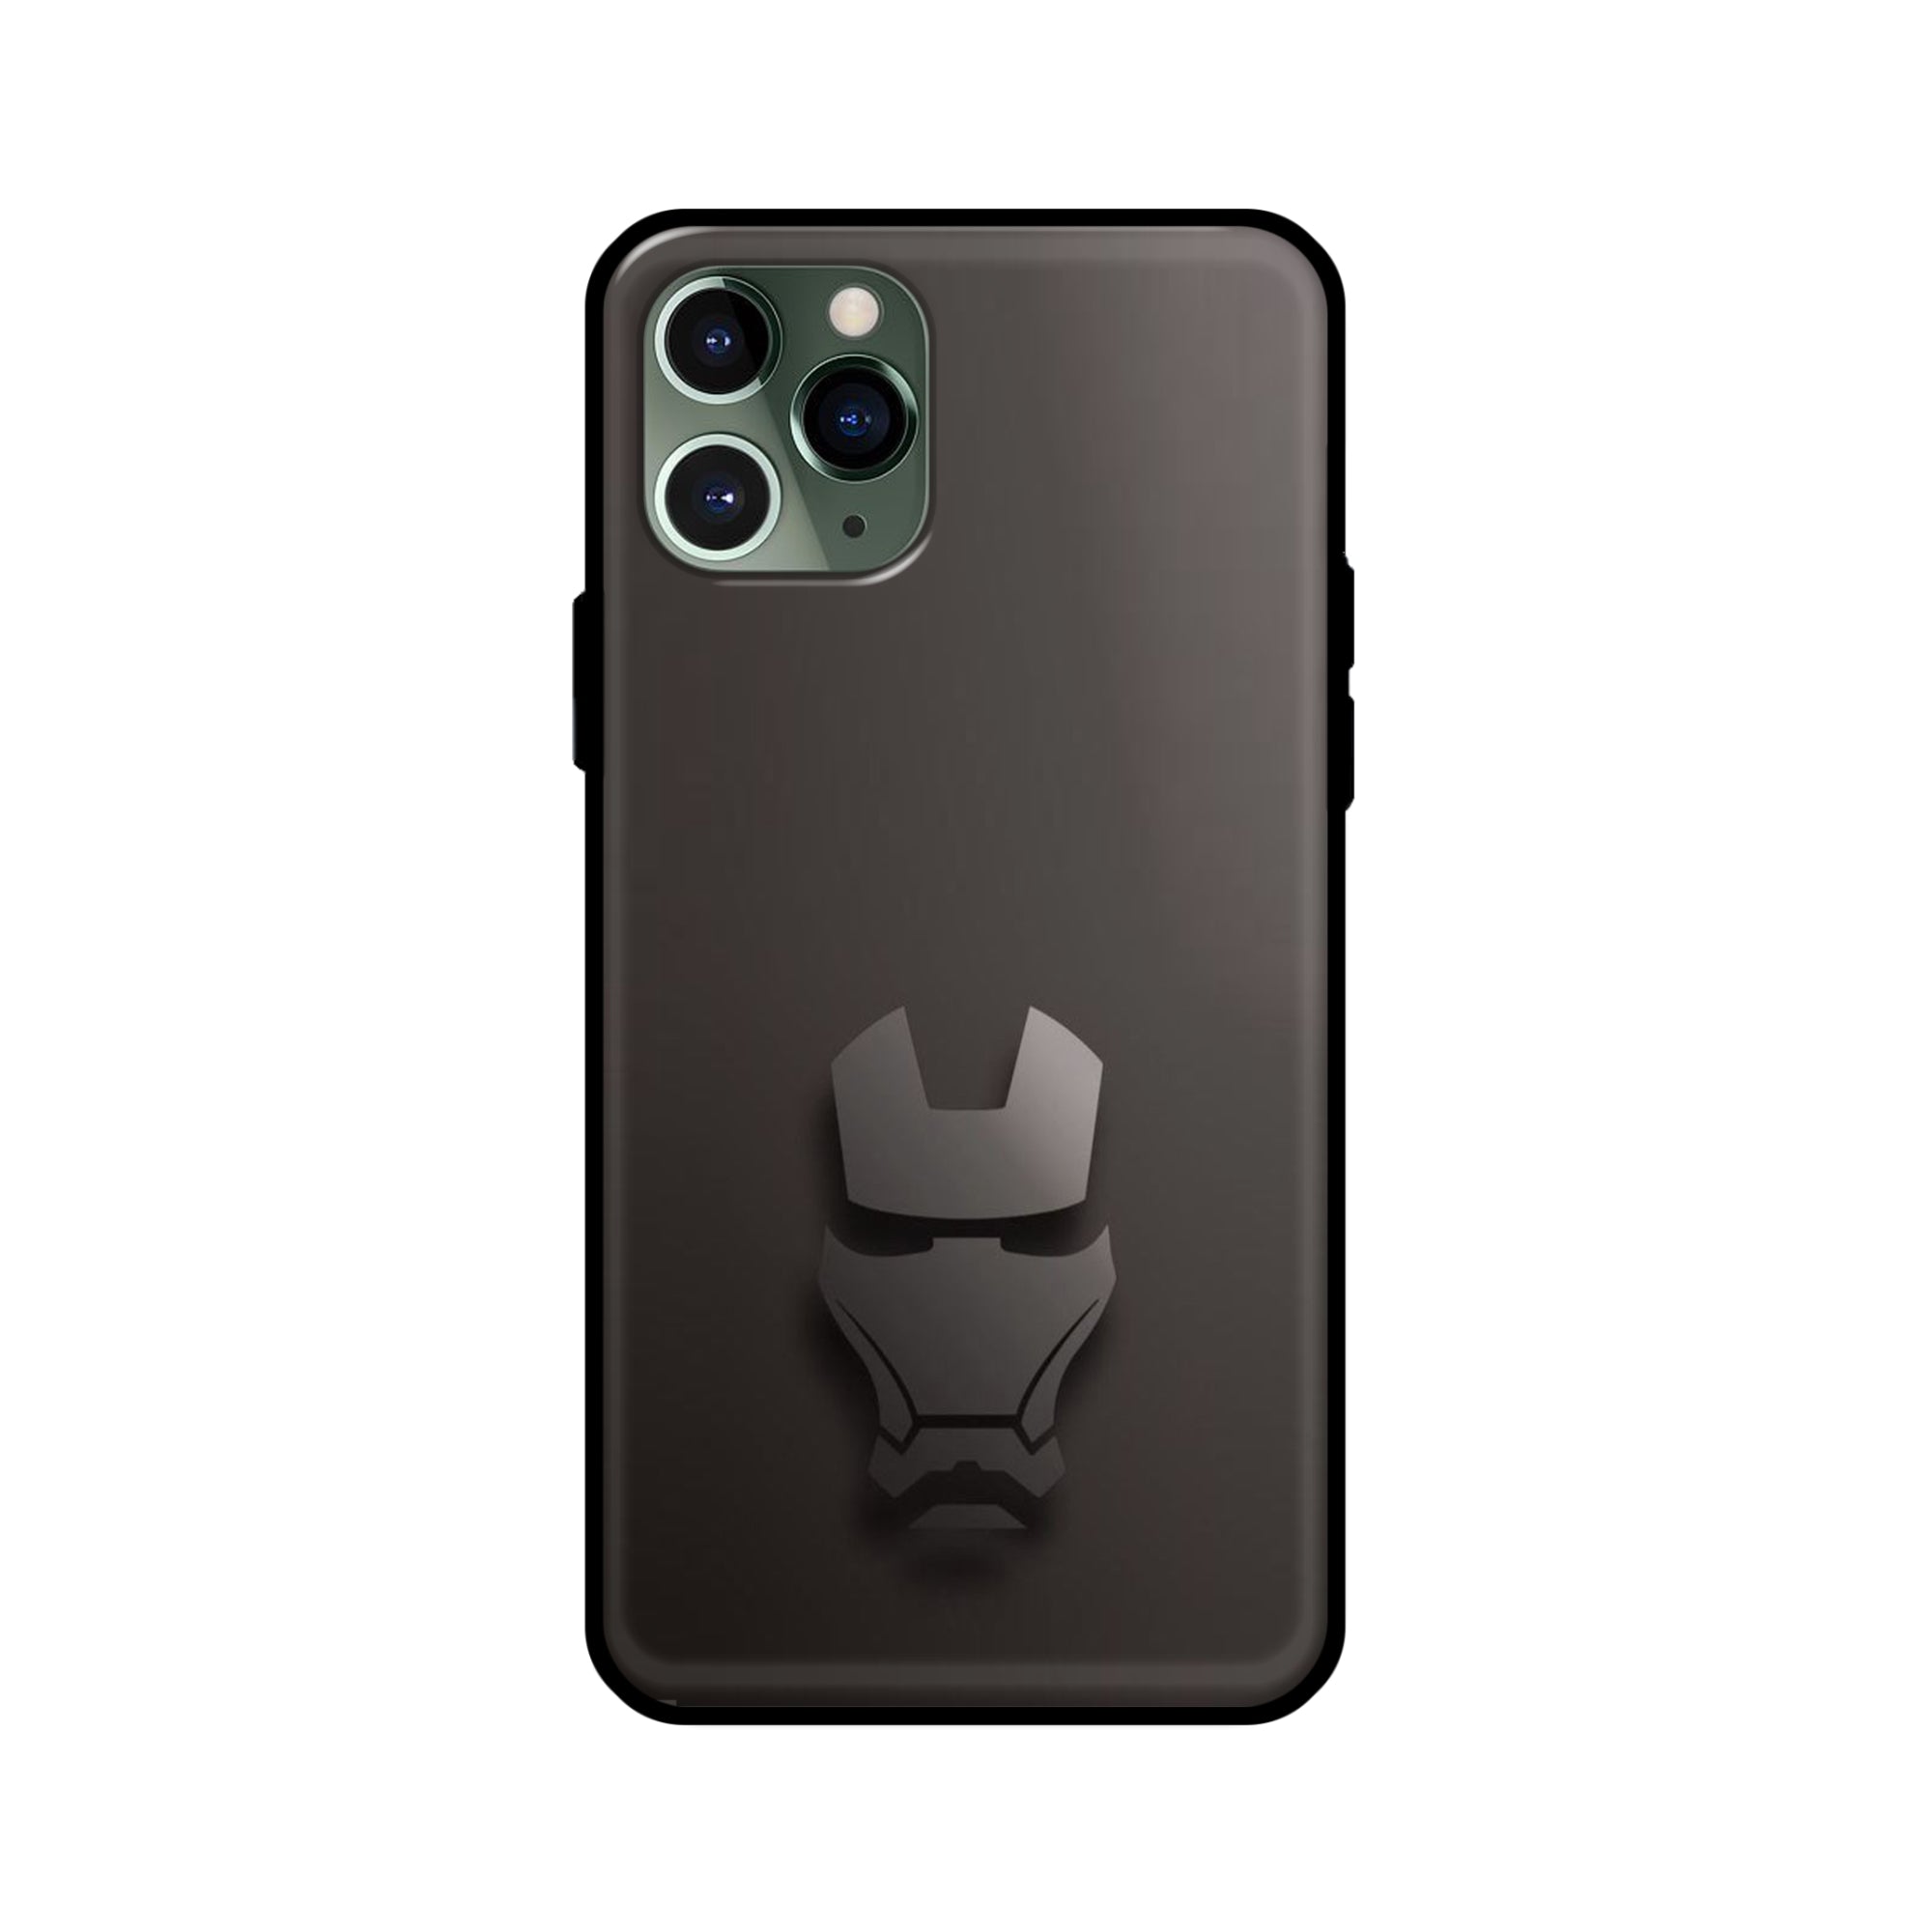 Buy Iron Man Logo Glass/Metal Back Mobile Phone Case/Cover For iPhone 11 Pro Online